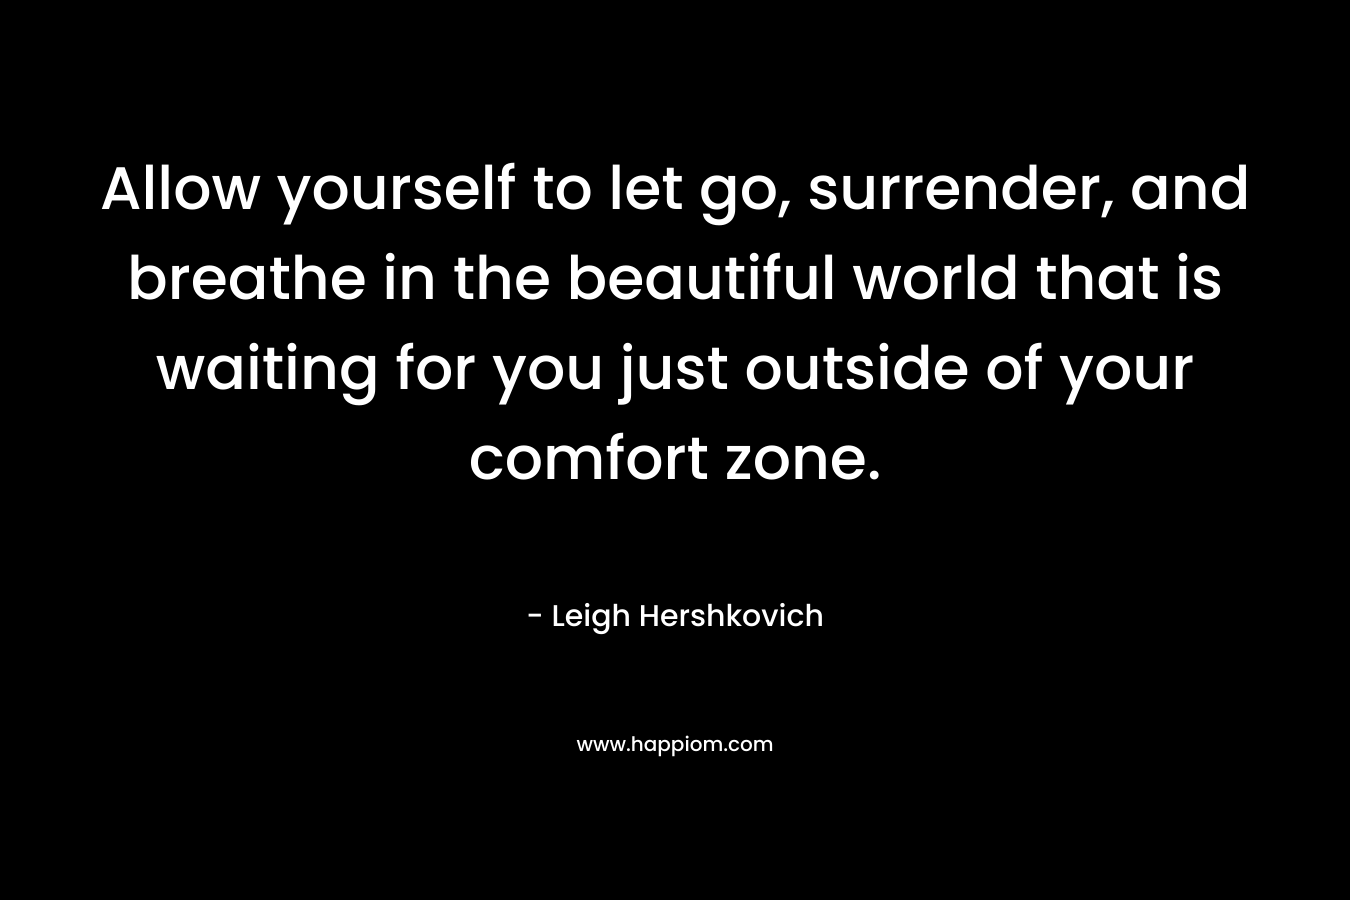 Allow yourself to let go, surrender, and breathe in the beautiful world that is waiting for you just outside of your comfort zone. – Leigh Hershkovich